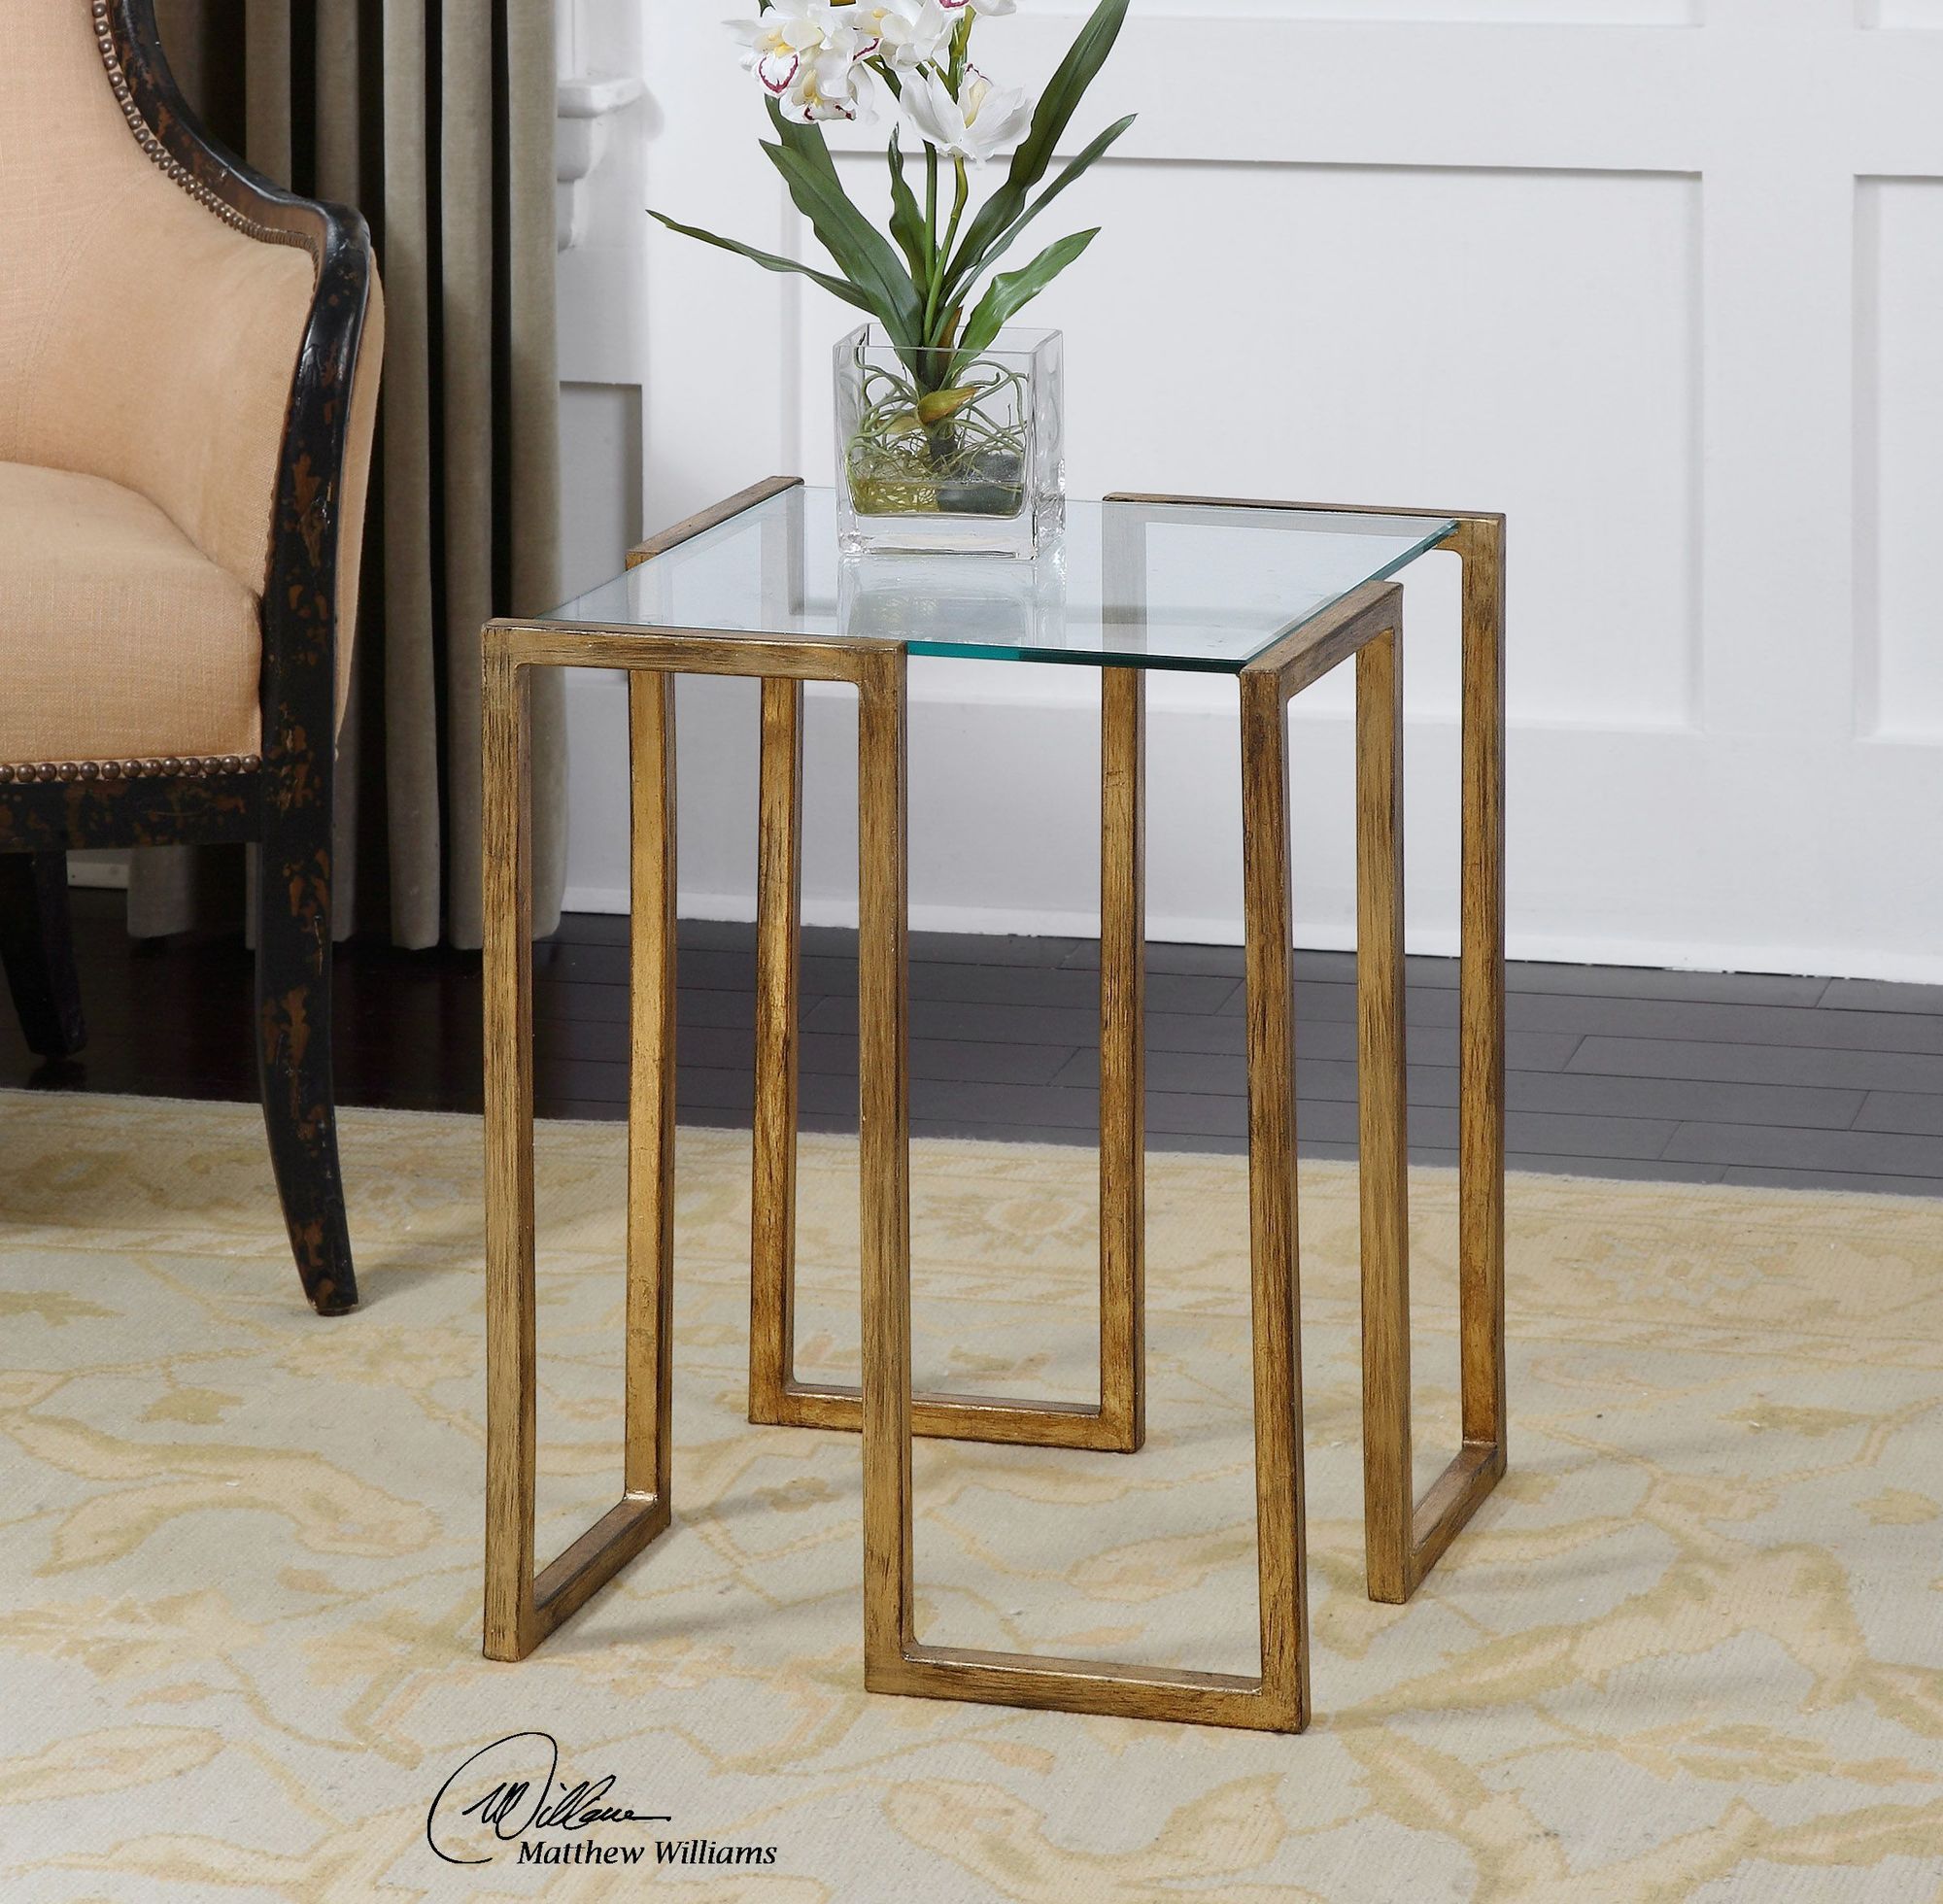 glass top accent table antique gold leaf mathis brothers furniture with hardwood floor tile showrooms bangalore cherry mission end tablecloth for dining canvas umbrella gray